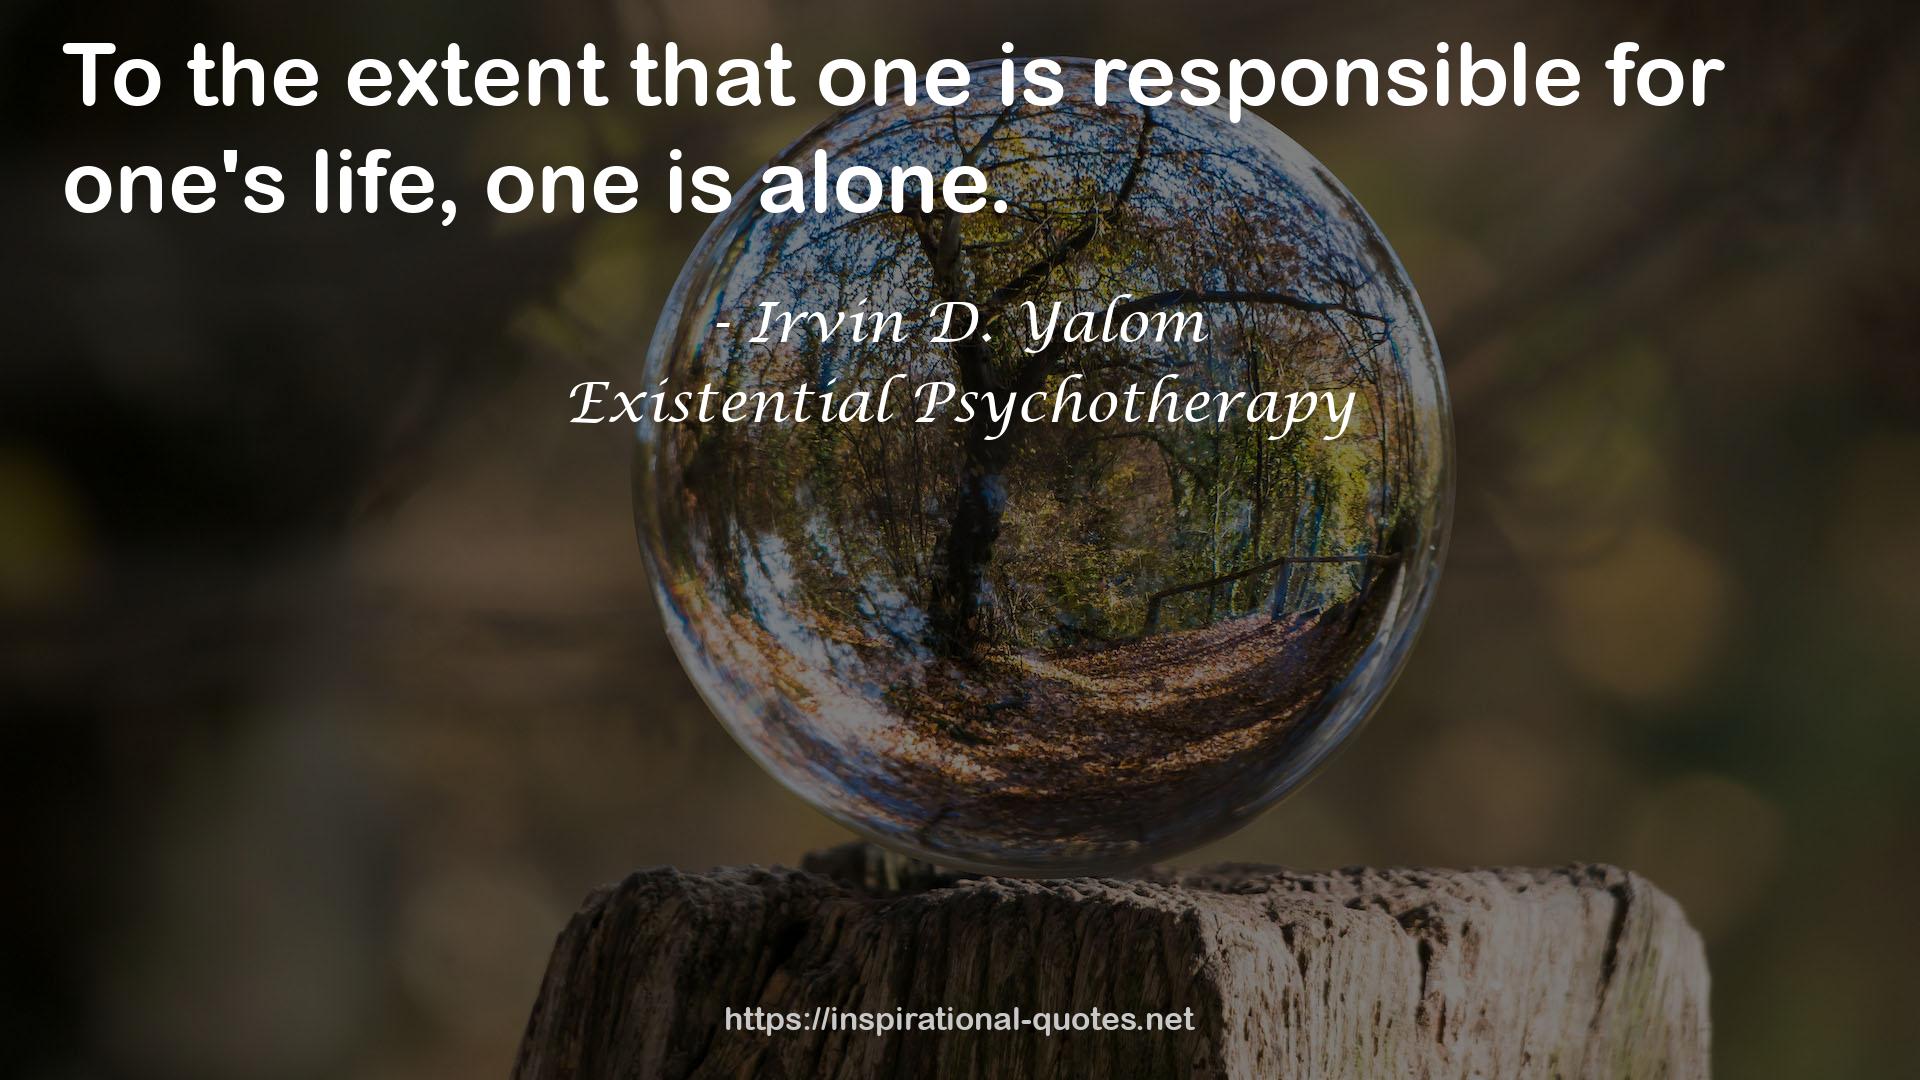 Existential Psychotherapy QUOTES